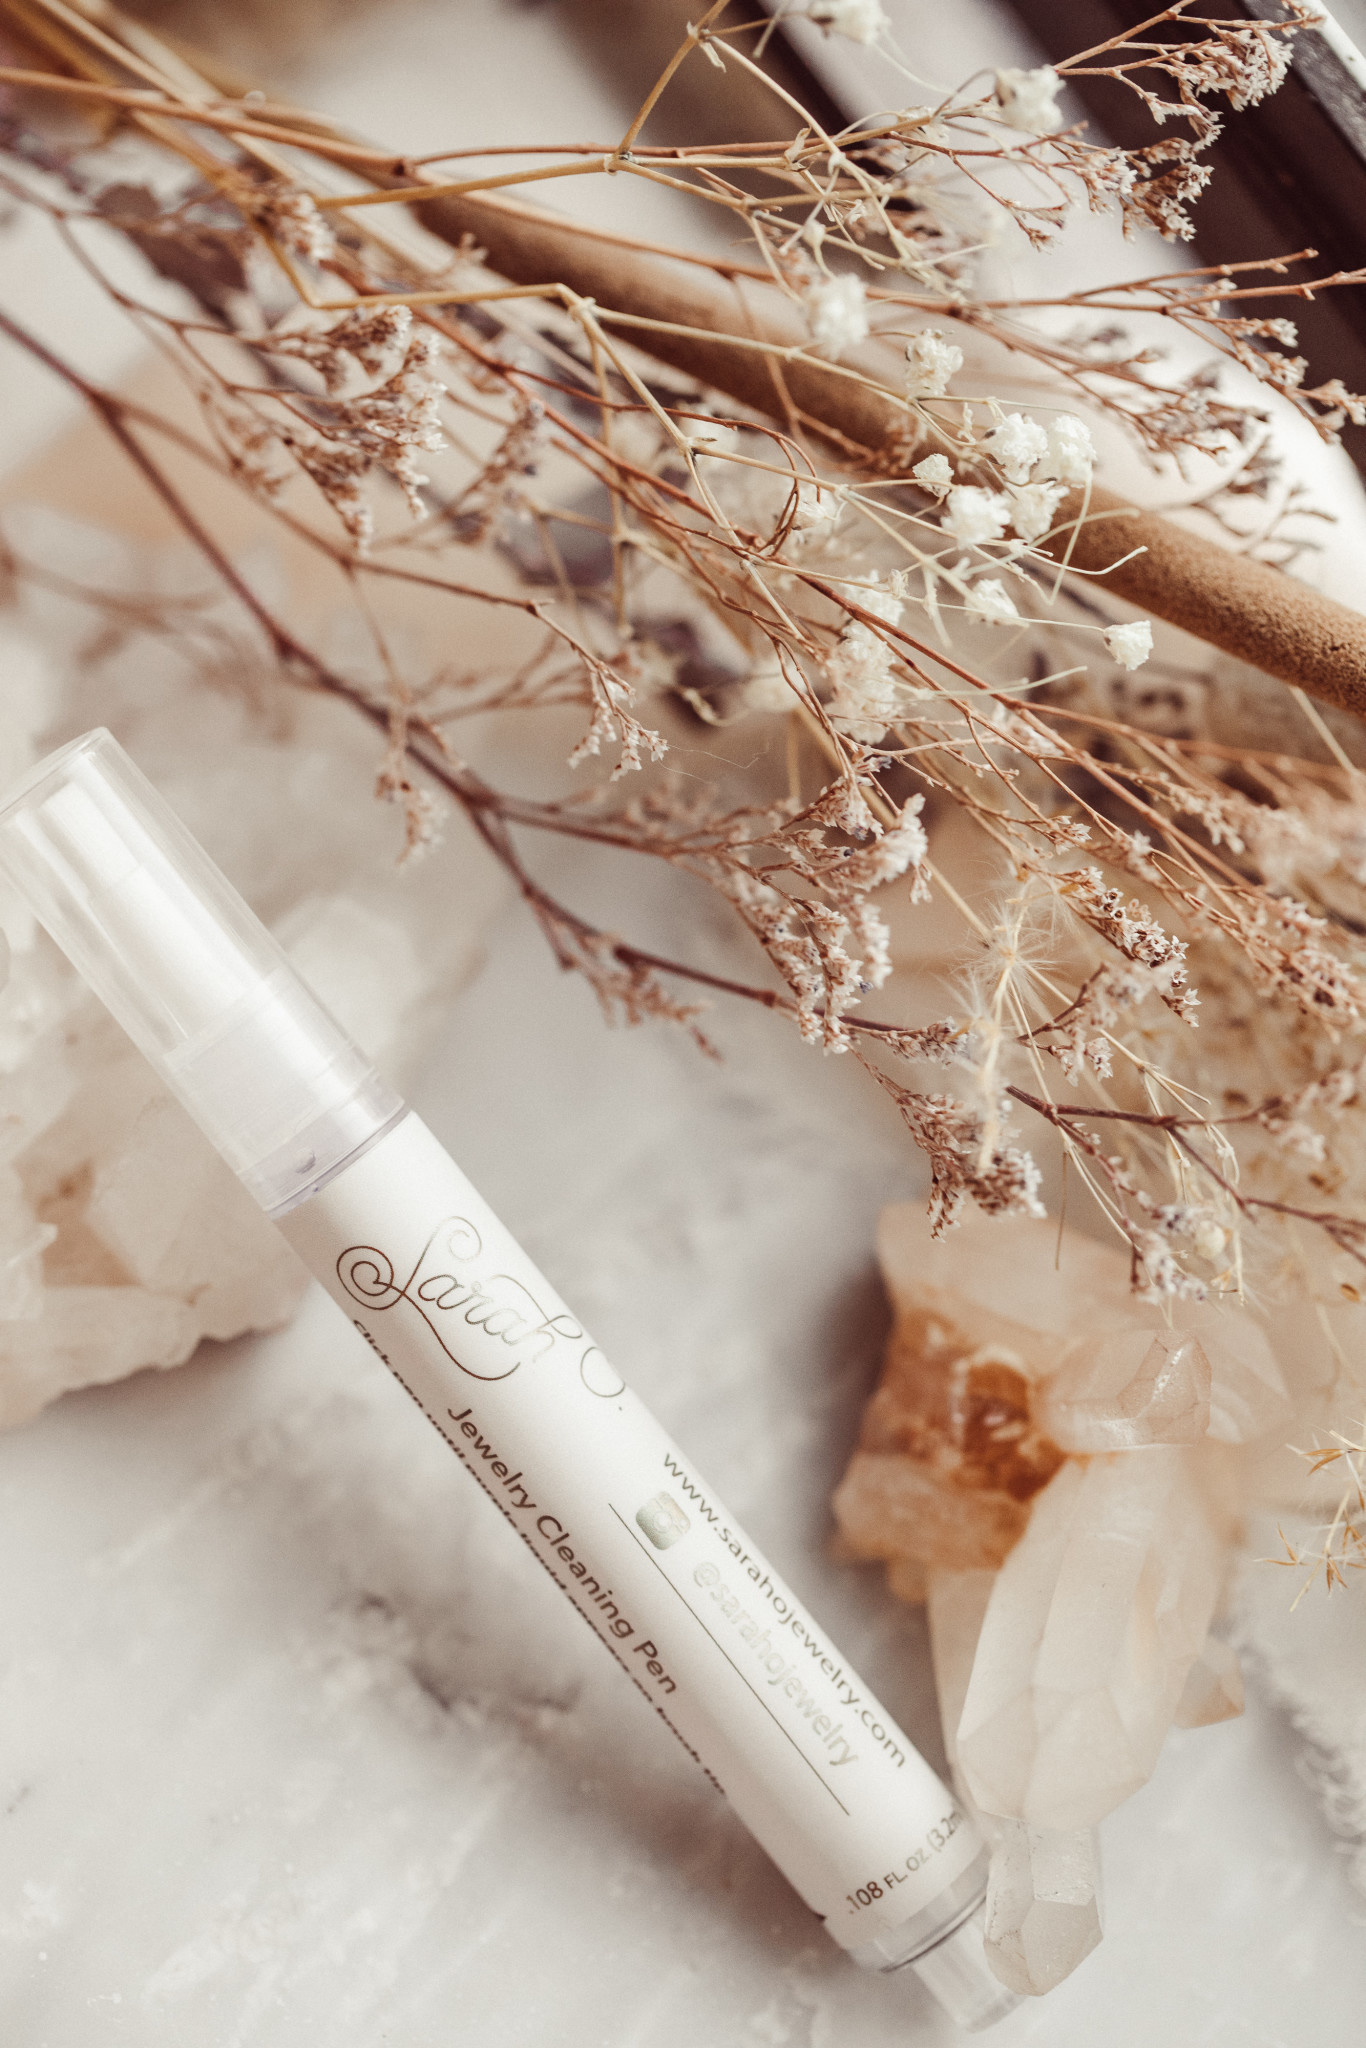 This $6 cleaning pen will make your jewelry look brand new